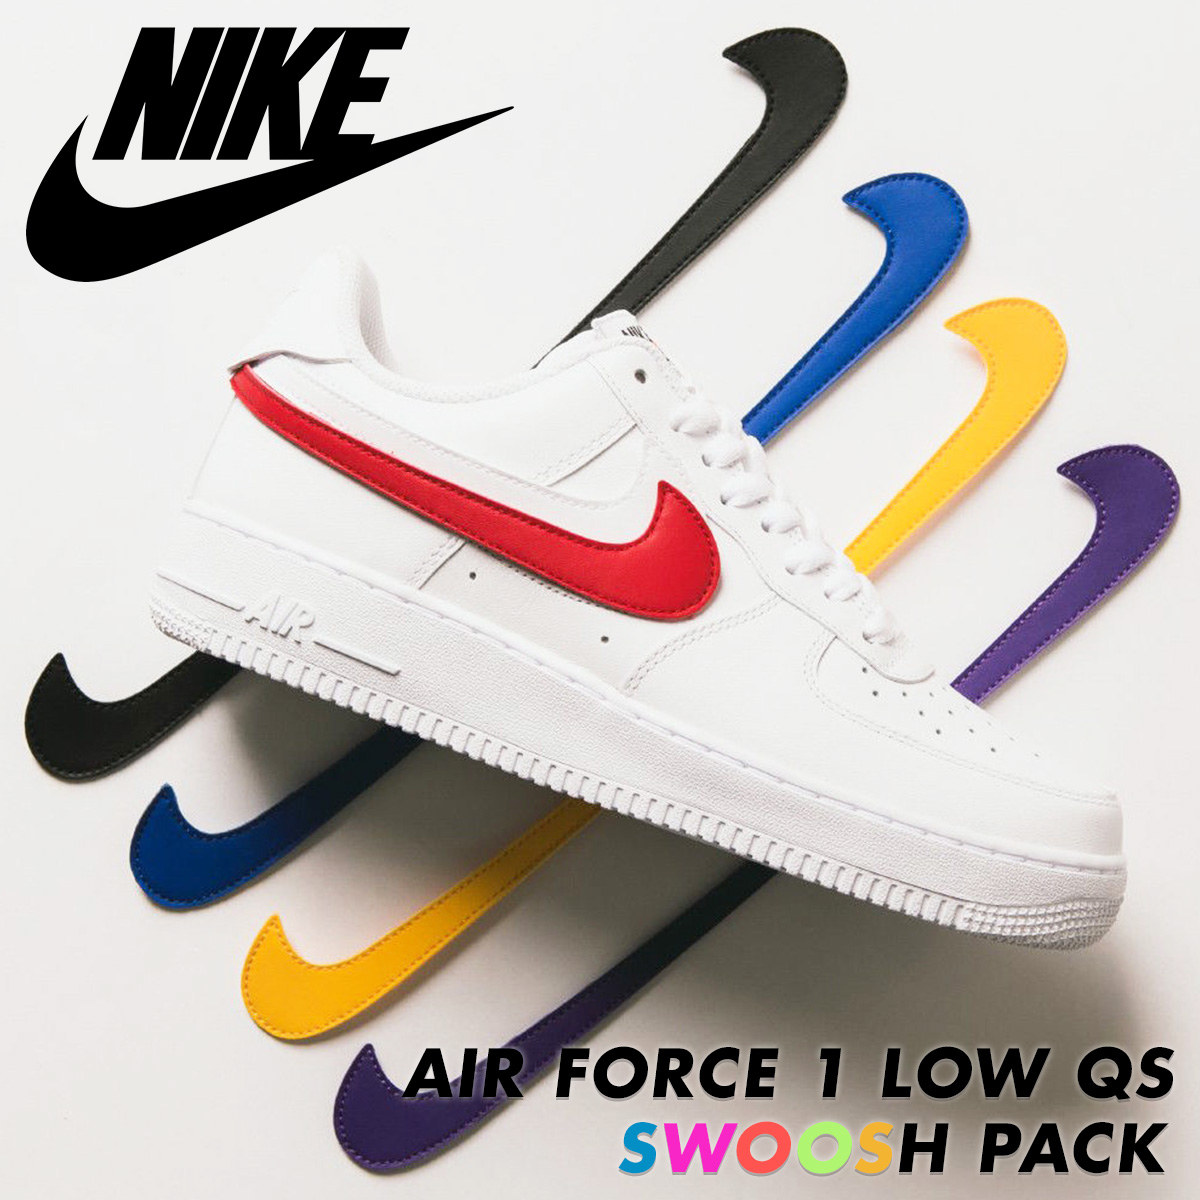 all air force 1 shoes ever made